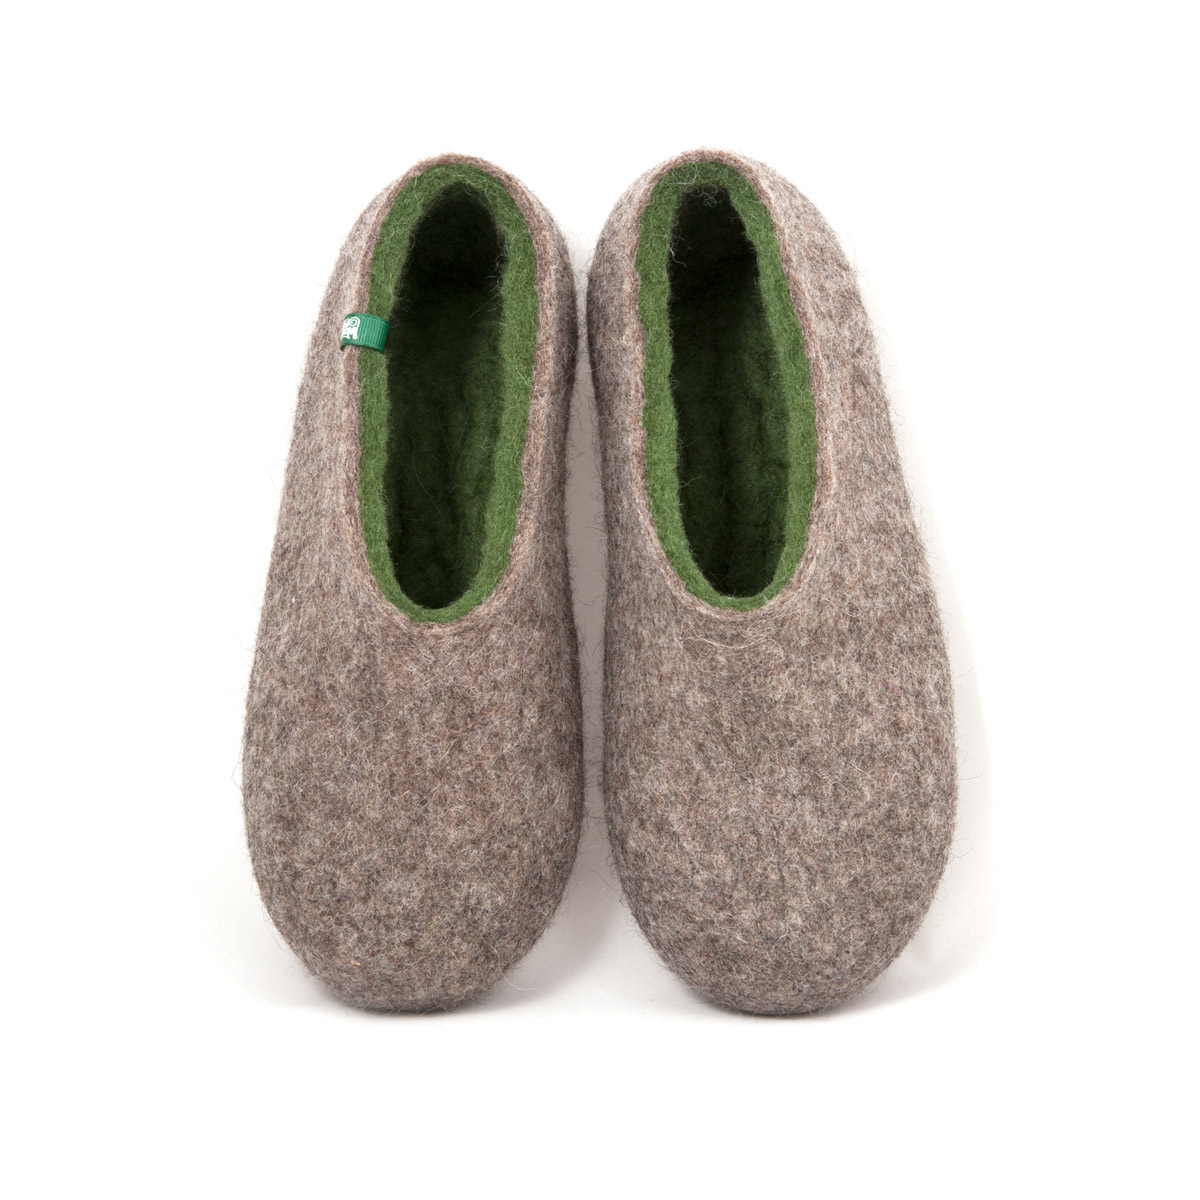 Woolen slippers DUAL NATURAL gray olive green